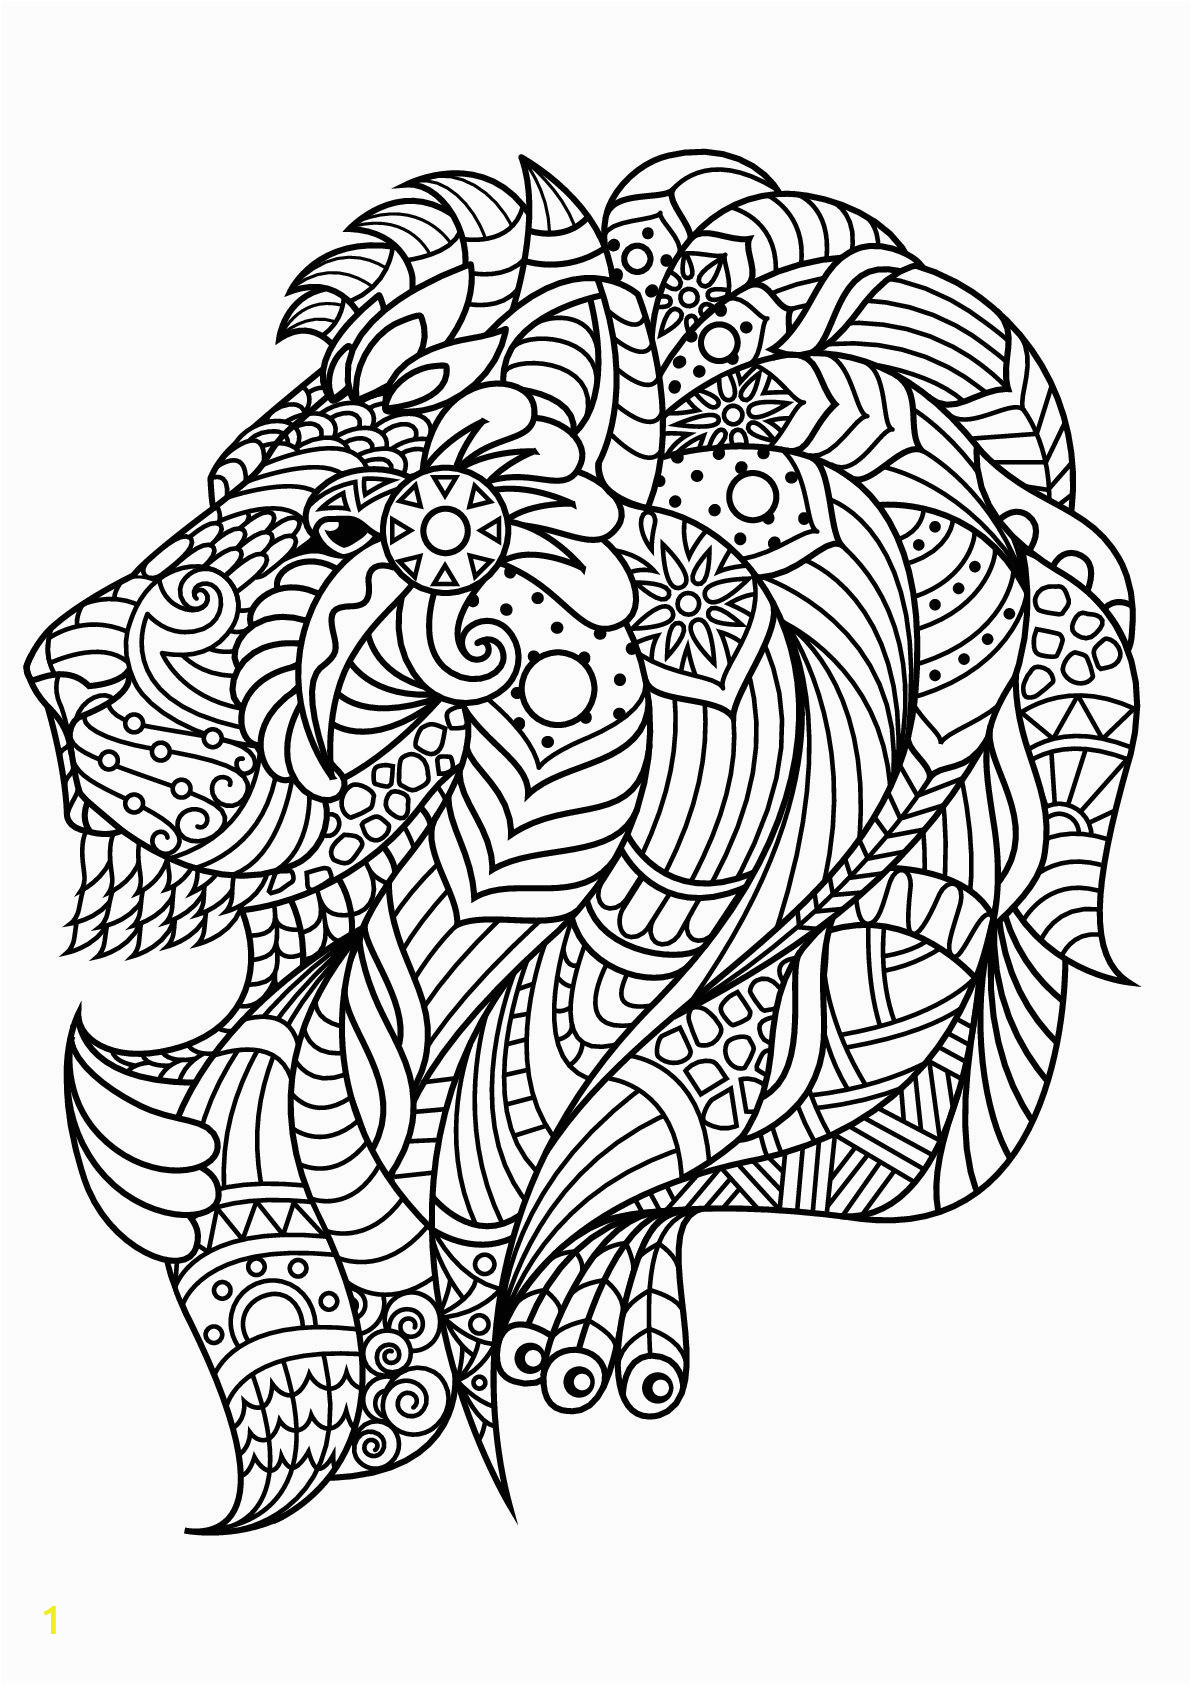 Pattern Coloring Pages Pdf Lion S Head with Plex and Beautiful Patterns From the